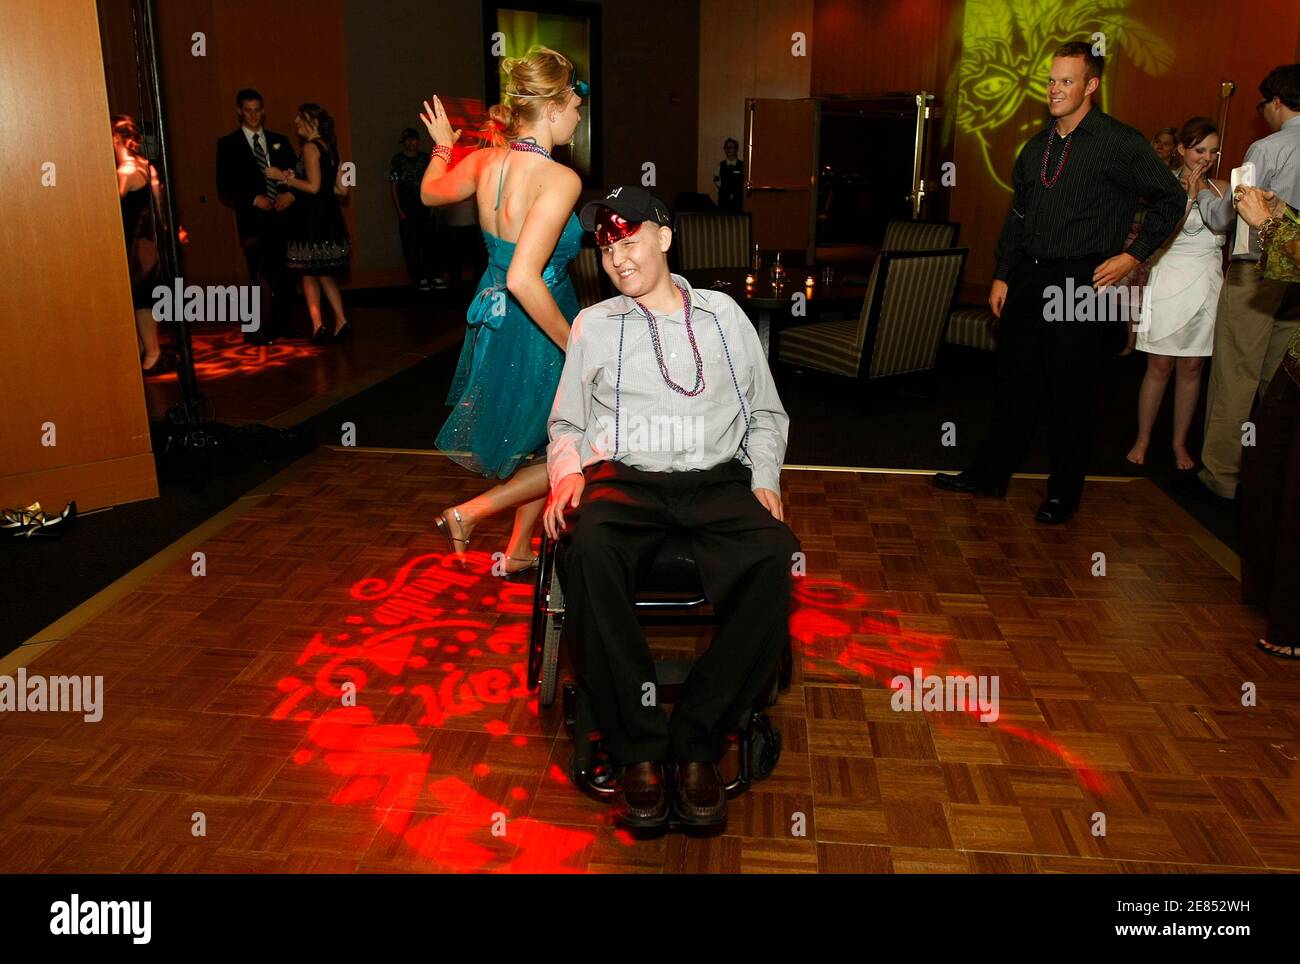 Mike Bamford, 17, participates in a dance while seated in his wheelchair with sister Natalie at a prom organised by The Children's Hospital for cancer patients, in Denver June 8, 2010. Mike has been fighting leukaemia since September 2009 and was recently discharged from the hospital. Picture taken June 8, 2010.    REUTERS/Rick Wilking (UNITED STATES - Tags: HEALTH SOCIETY) Stock Photo